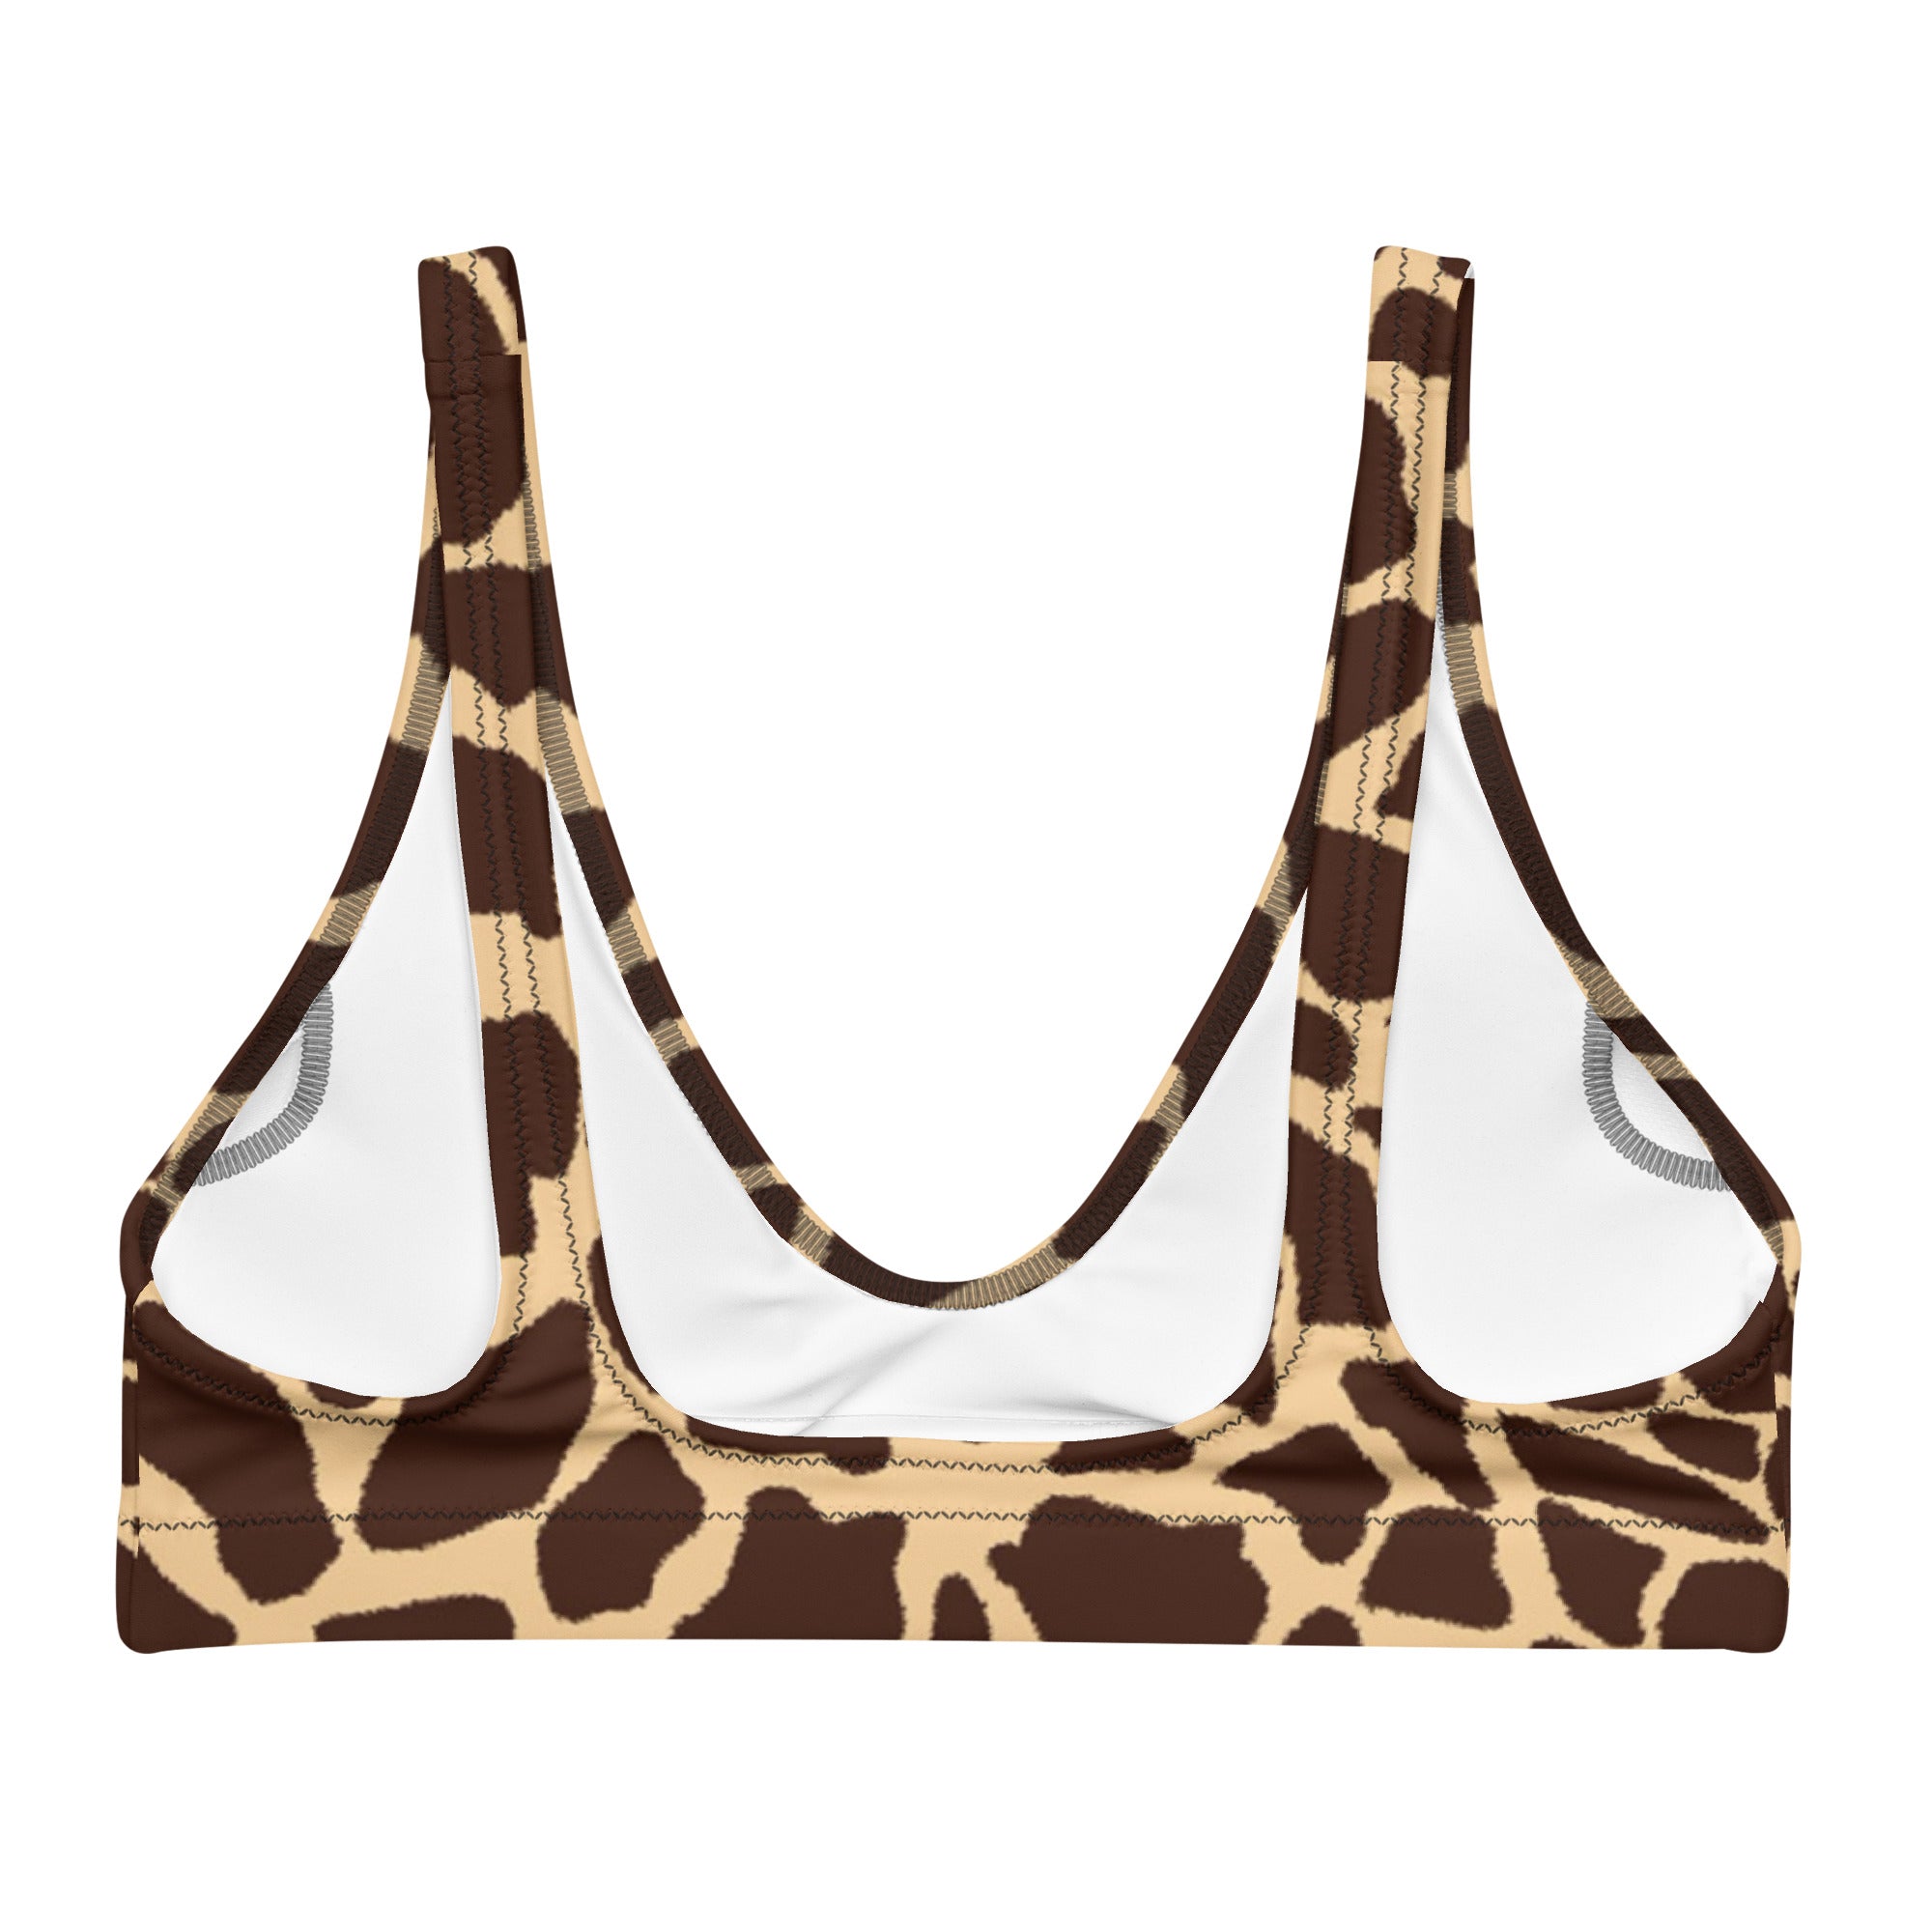 The bold Giraffe print design exudes confidence and sets you apart from the crowd, whether you're lounging by the pool or soaking up the sun at the beach.